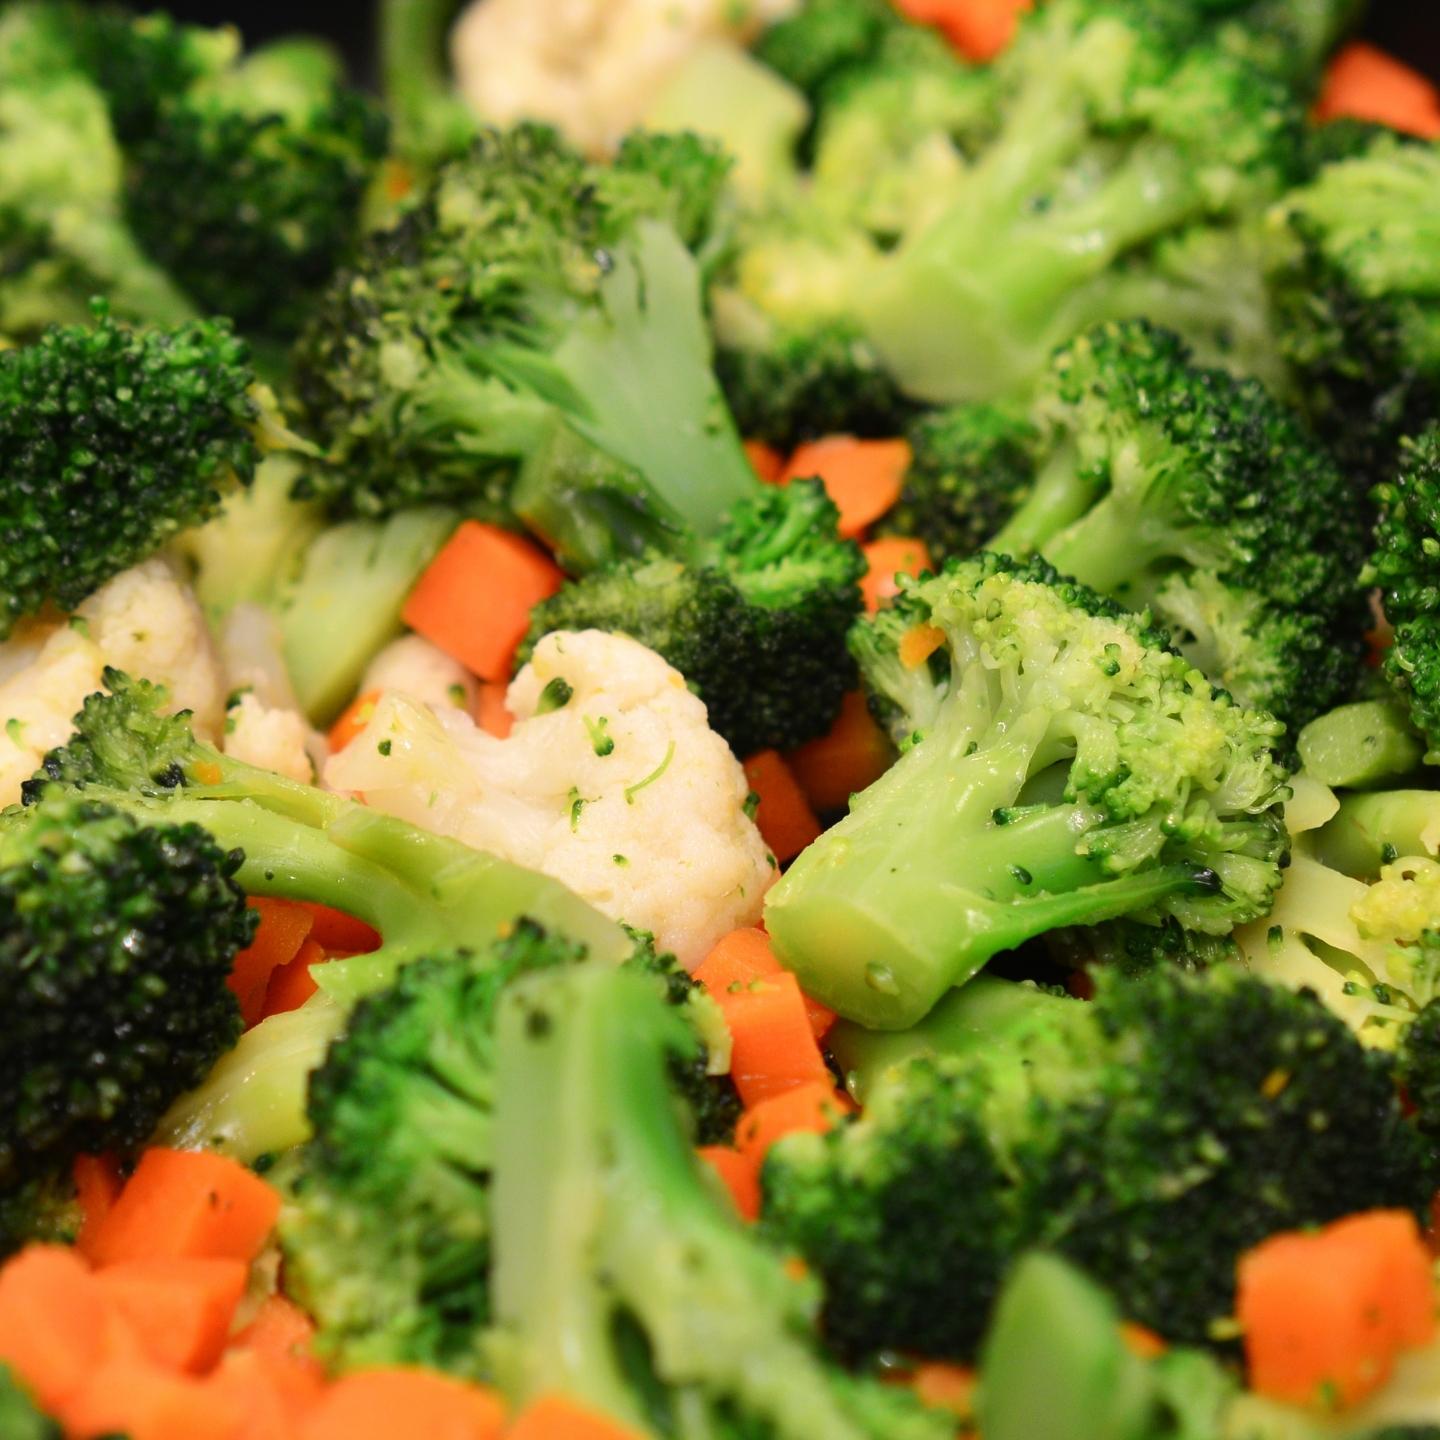 Steamed Broccoli, Carrots, and Cauliflower